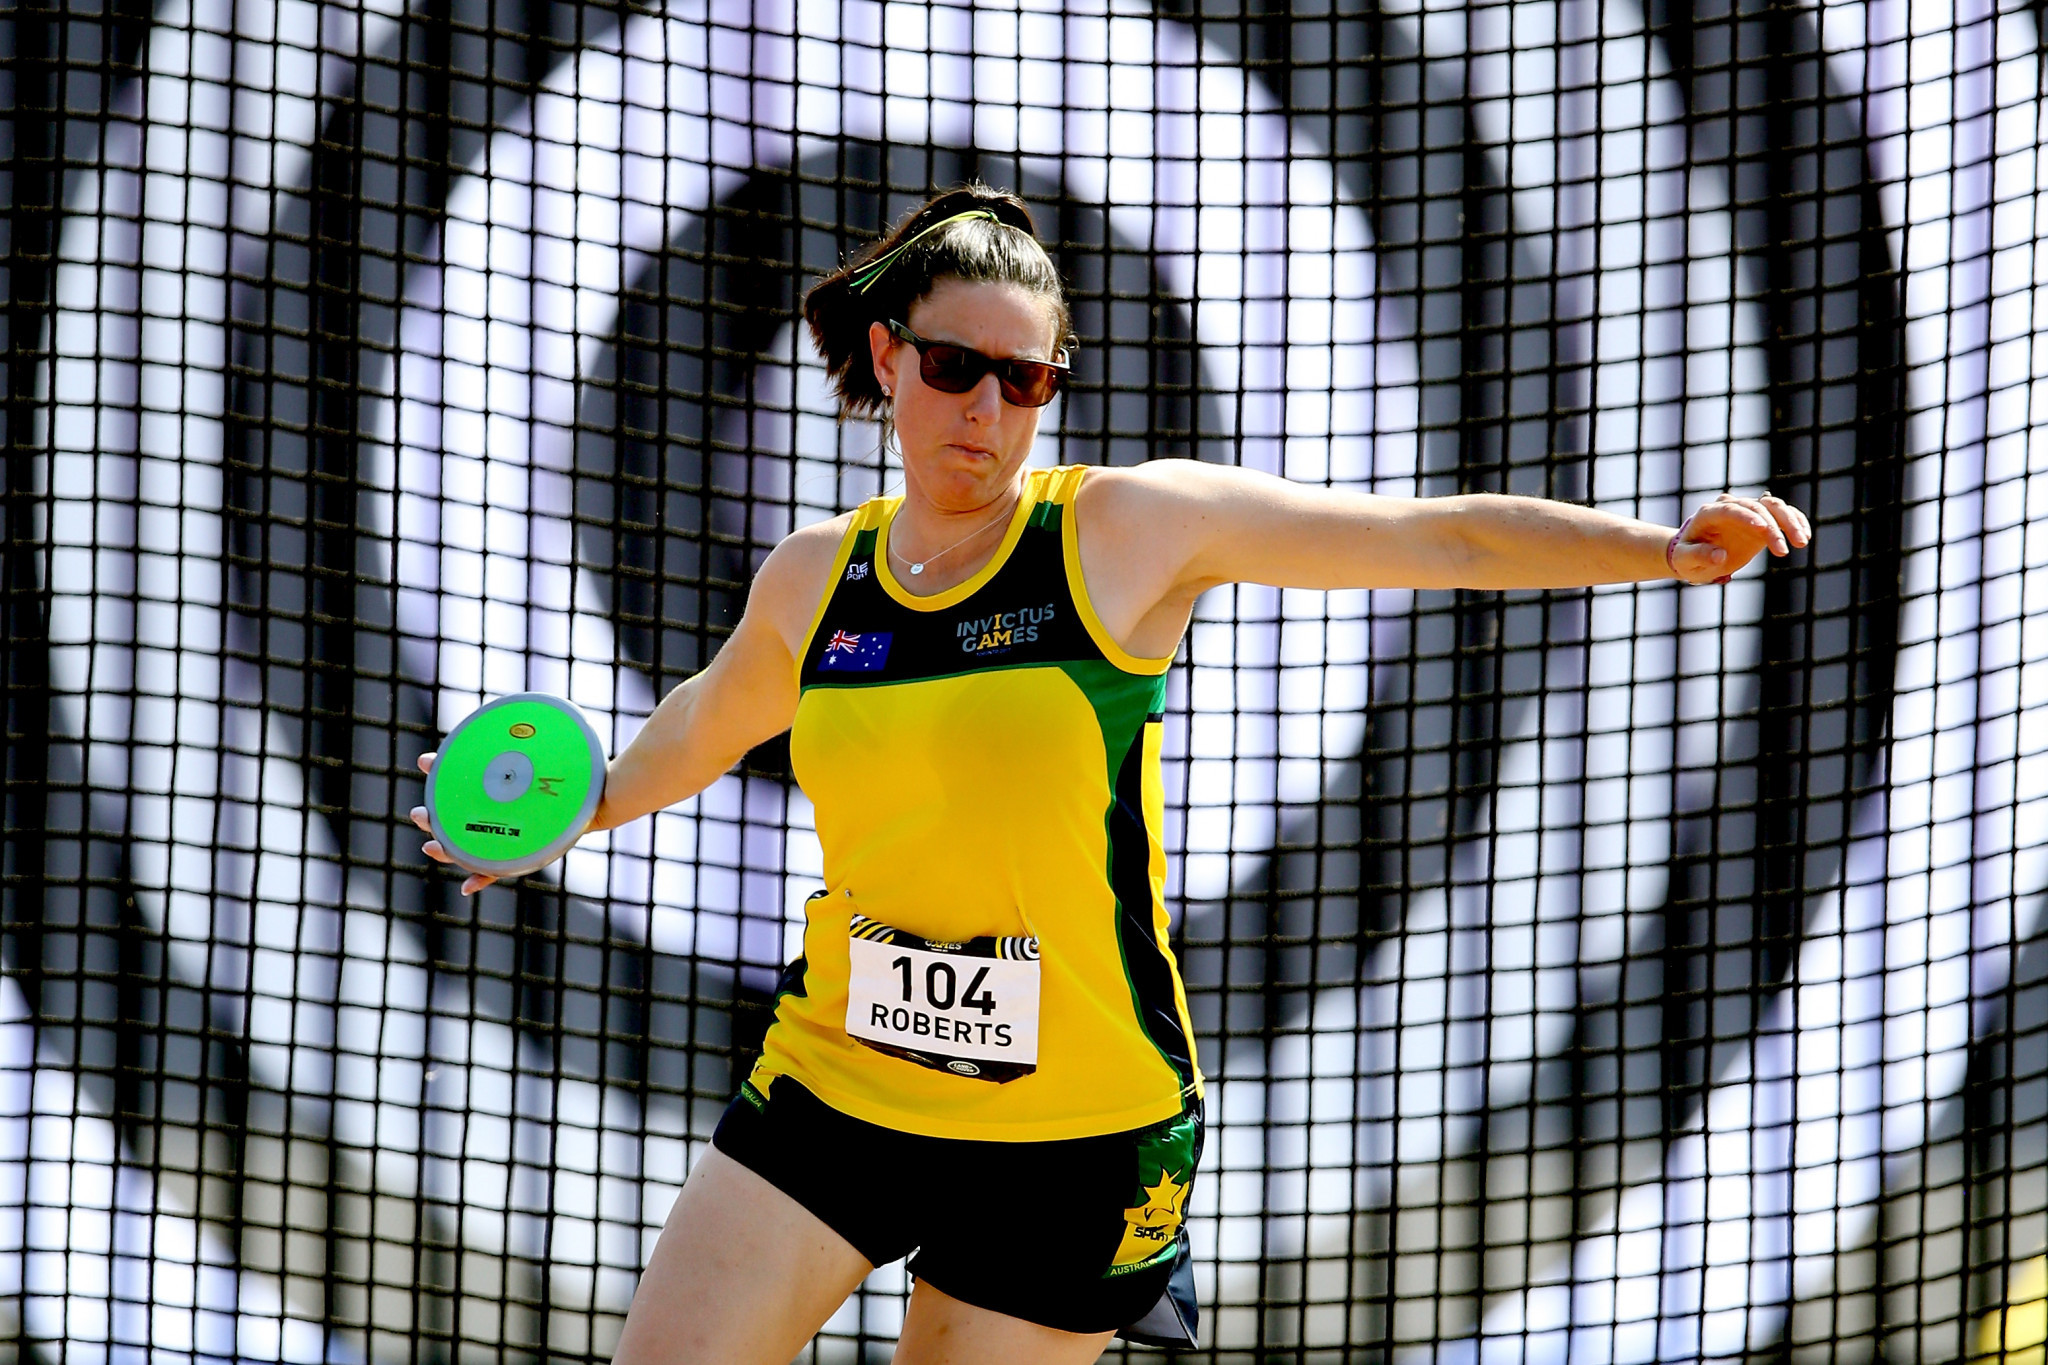 Melissa Roberts won bronze for Australia today in the women's IF4 discus final ©Getty Images